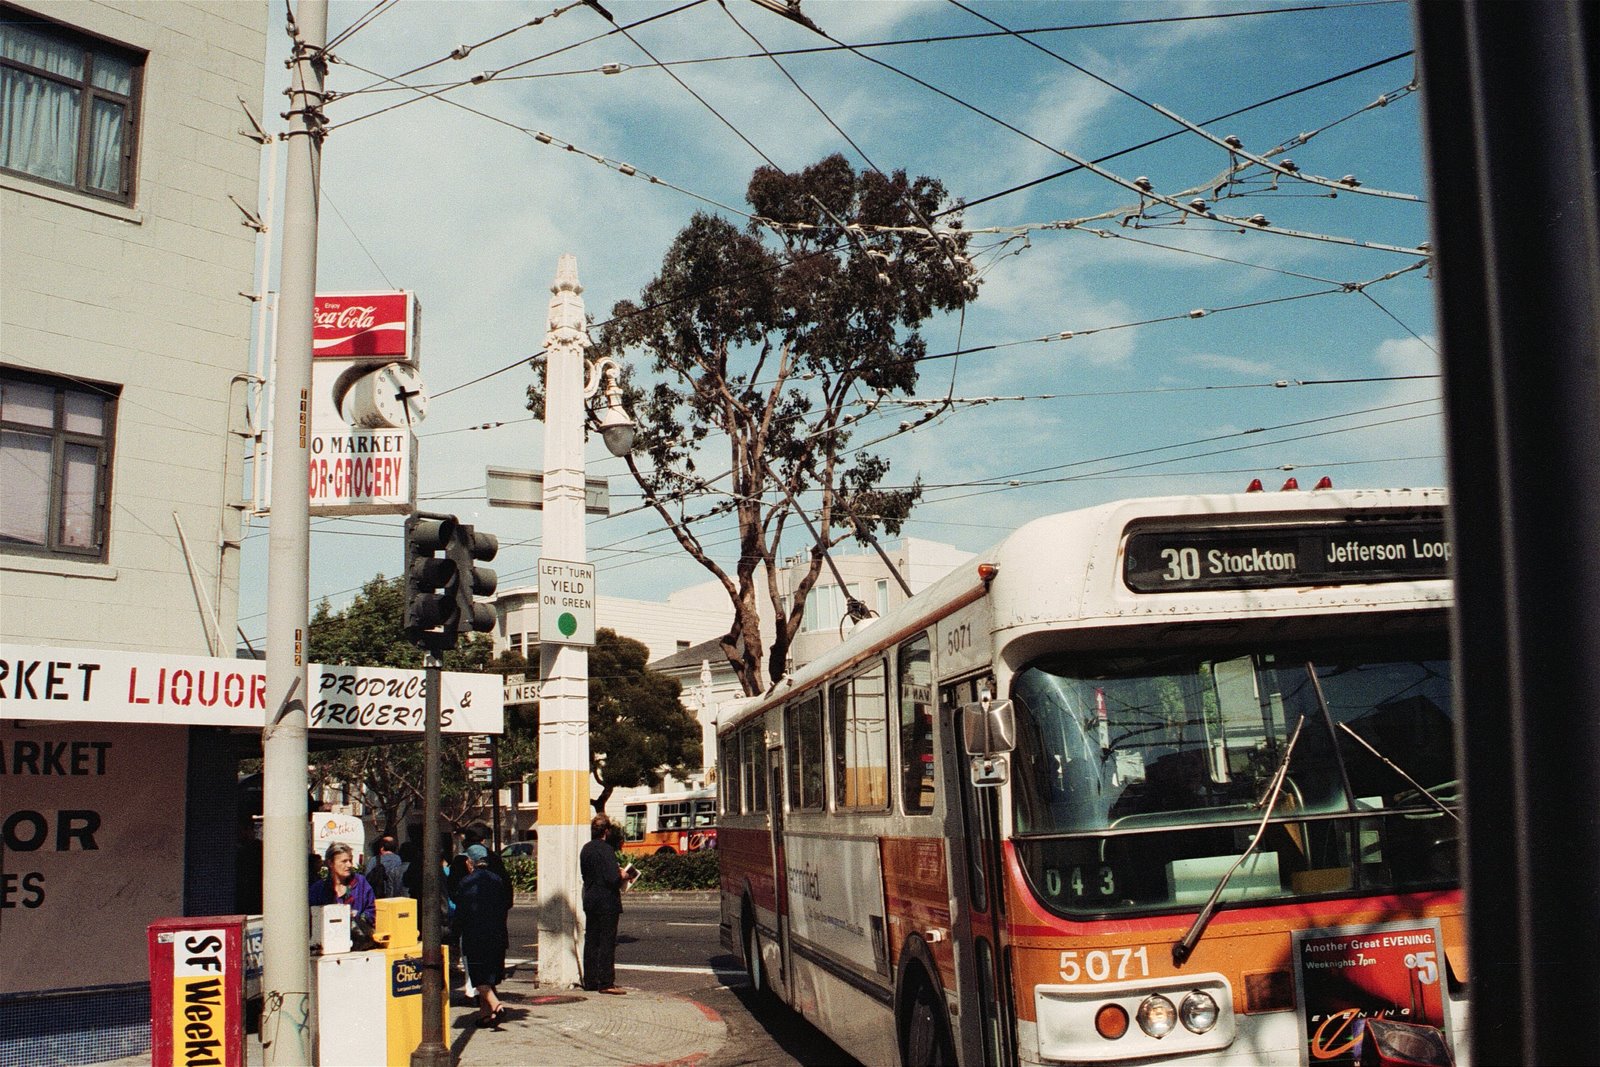 [US-CA-San-Francisco-by-bus-001-electric-trolley-bus-power-cables-overhead-bus-has-orange-red-white-livery-DHD.jpg]